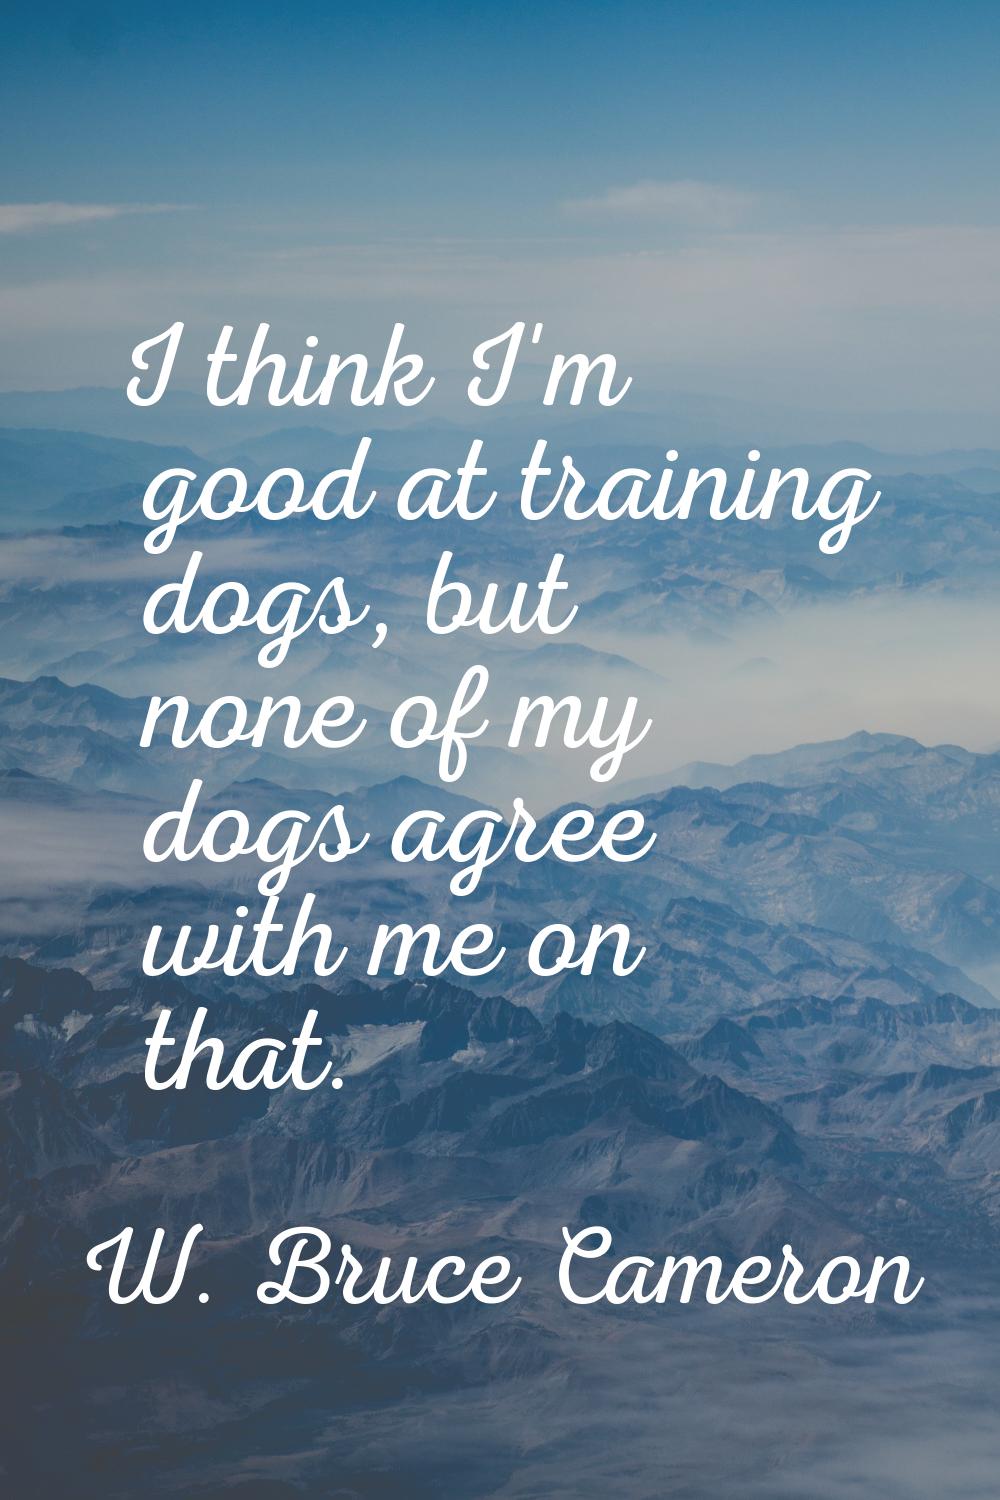 I think I'm good at training dogs, but none of my dogs agree with me on that.